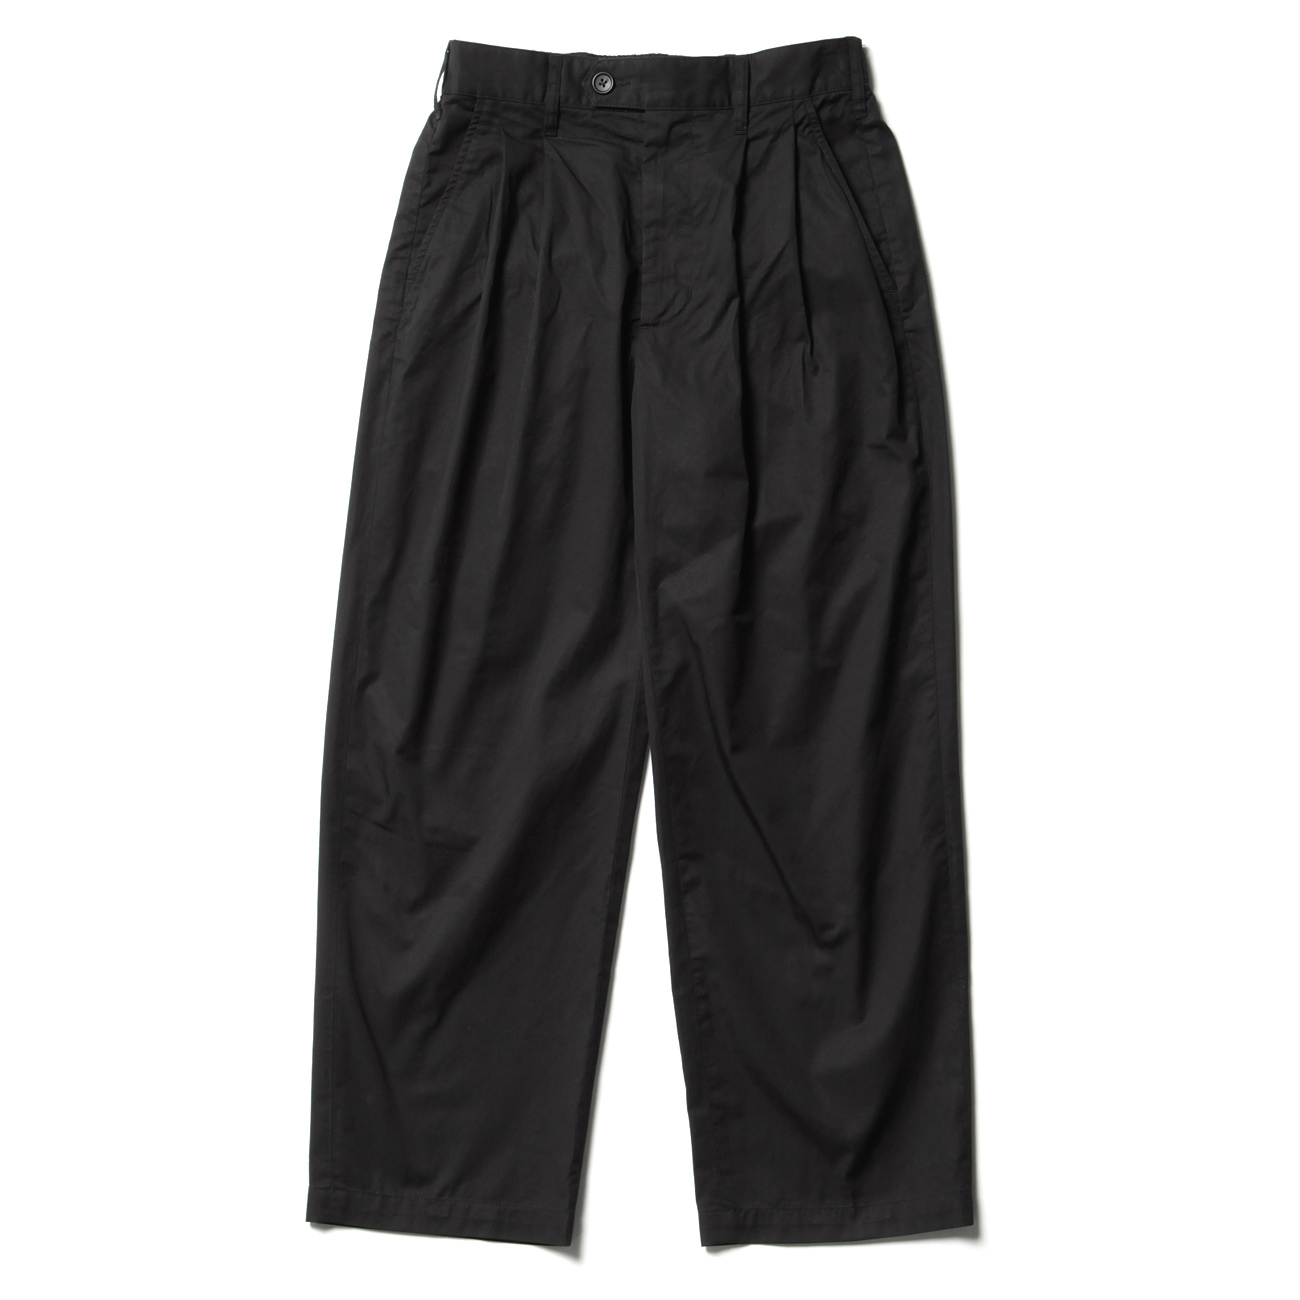 Emerson Pant - High Count Twill - Black